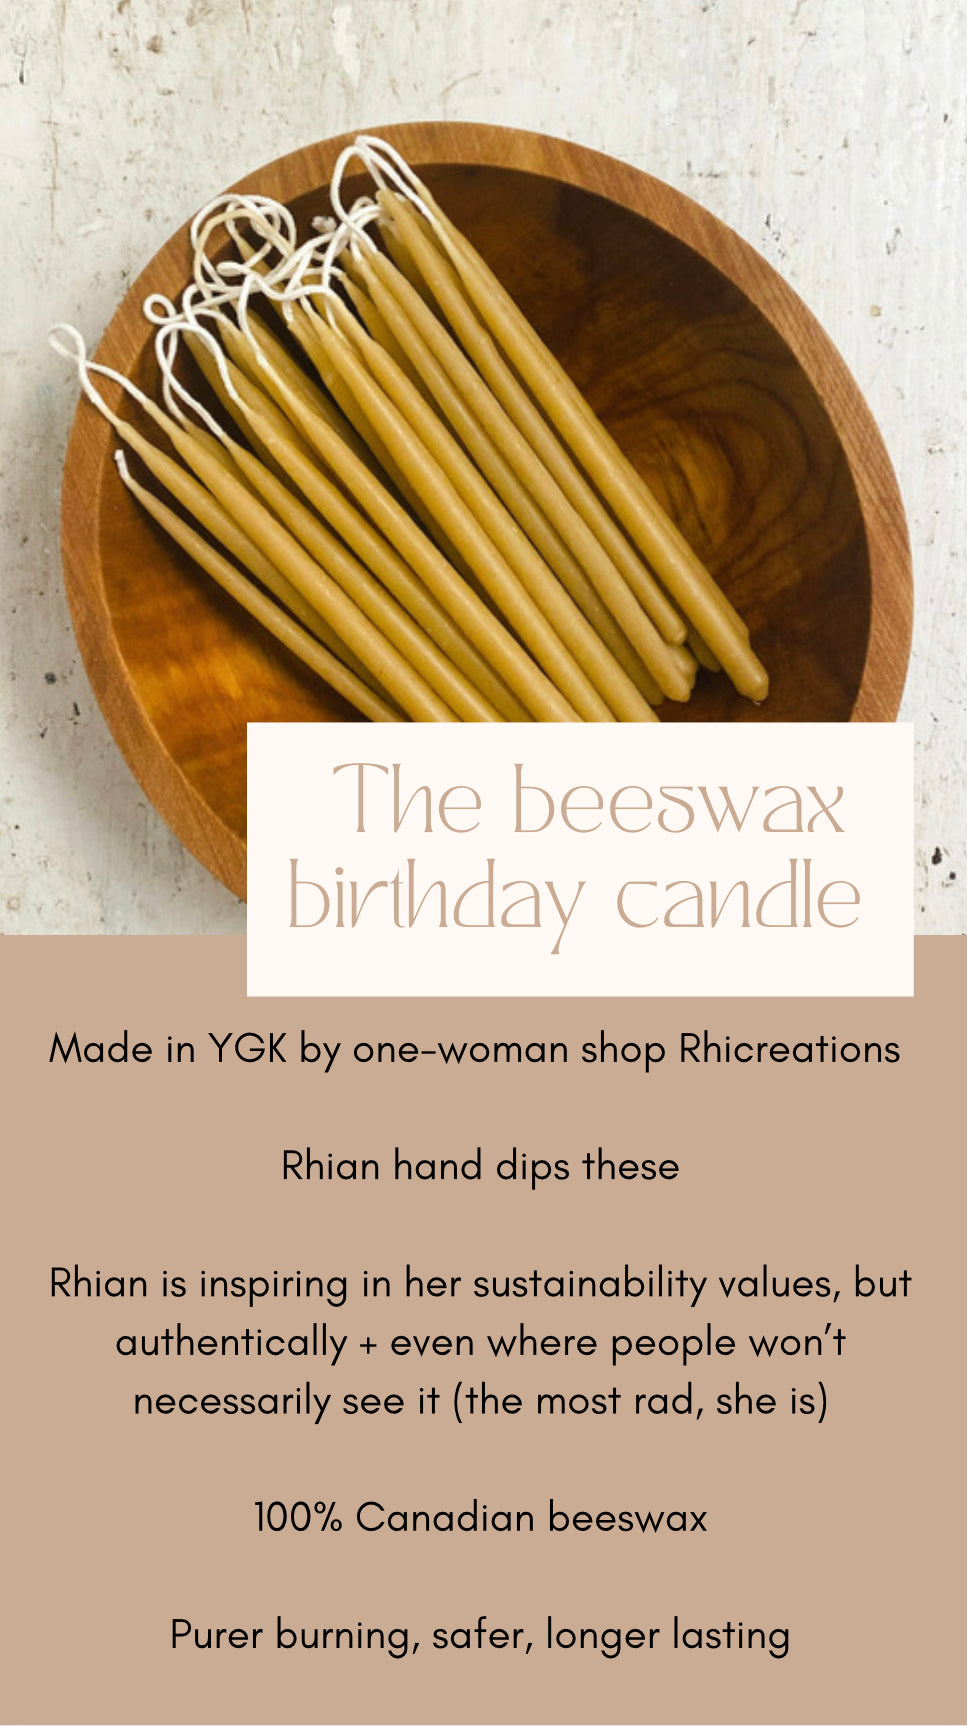 Locally Hand Dipped Beeswax Birthday Candles